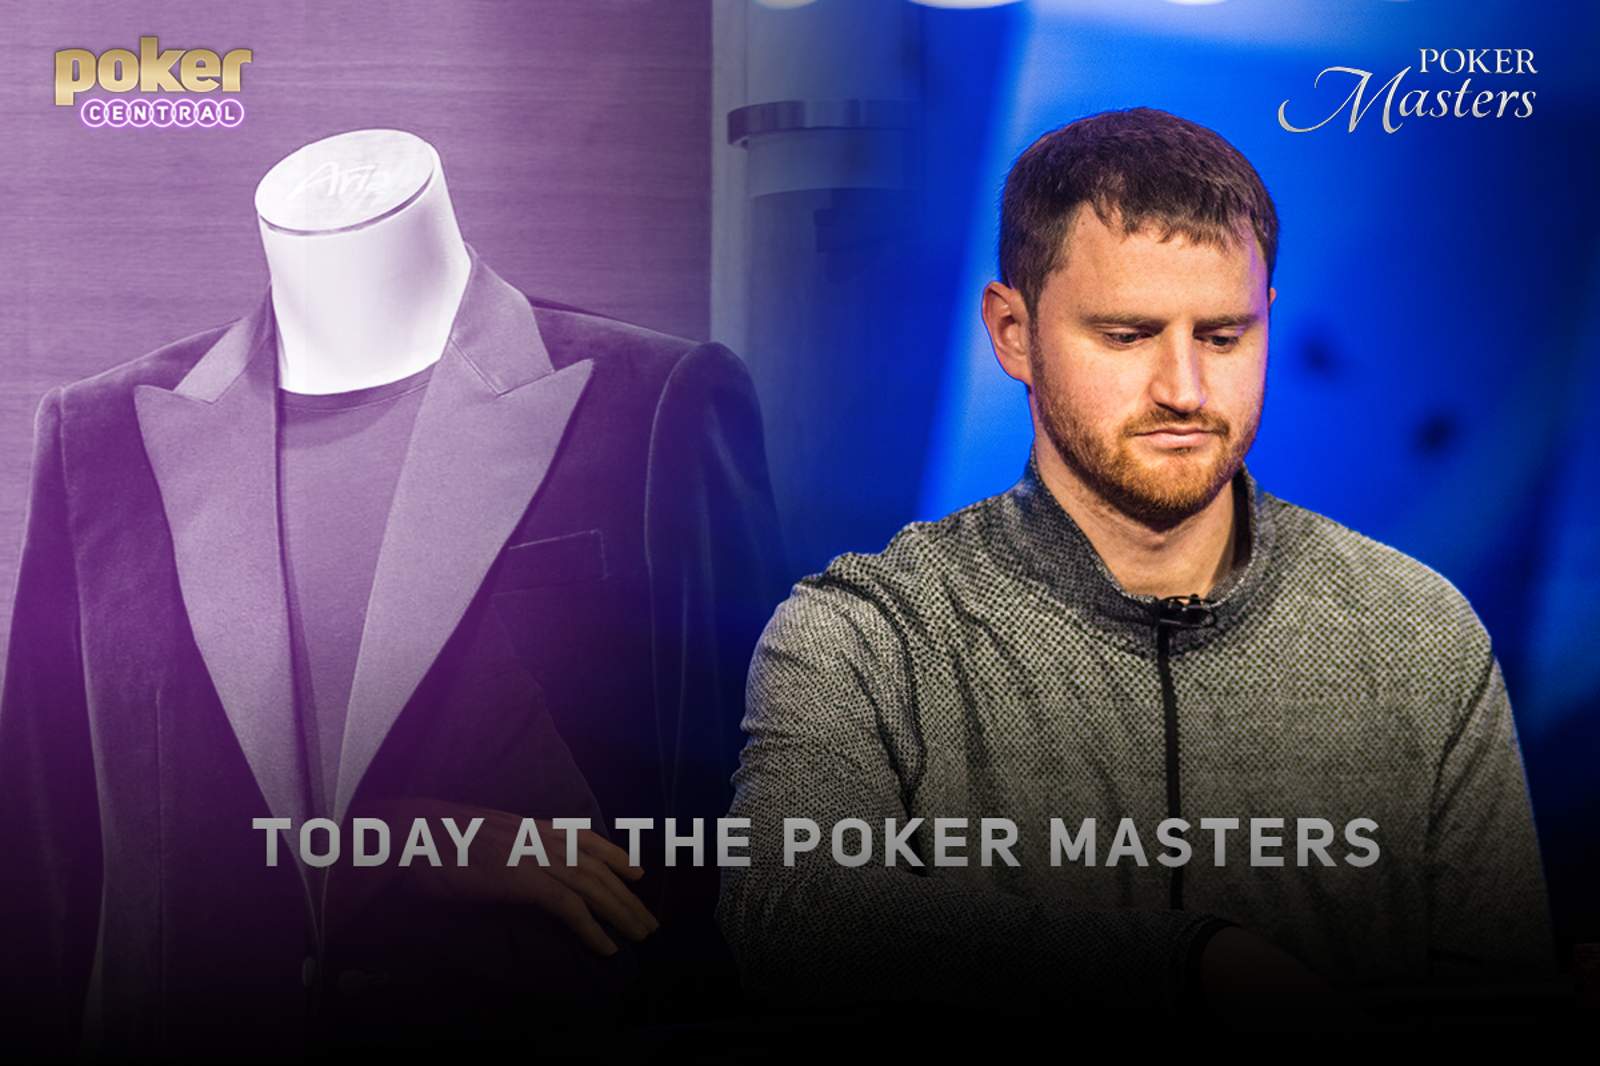 Today at the Poker Masters: Open and Close